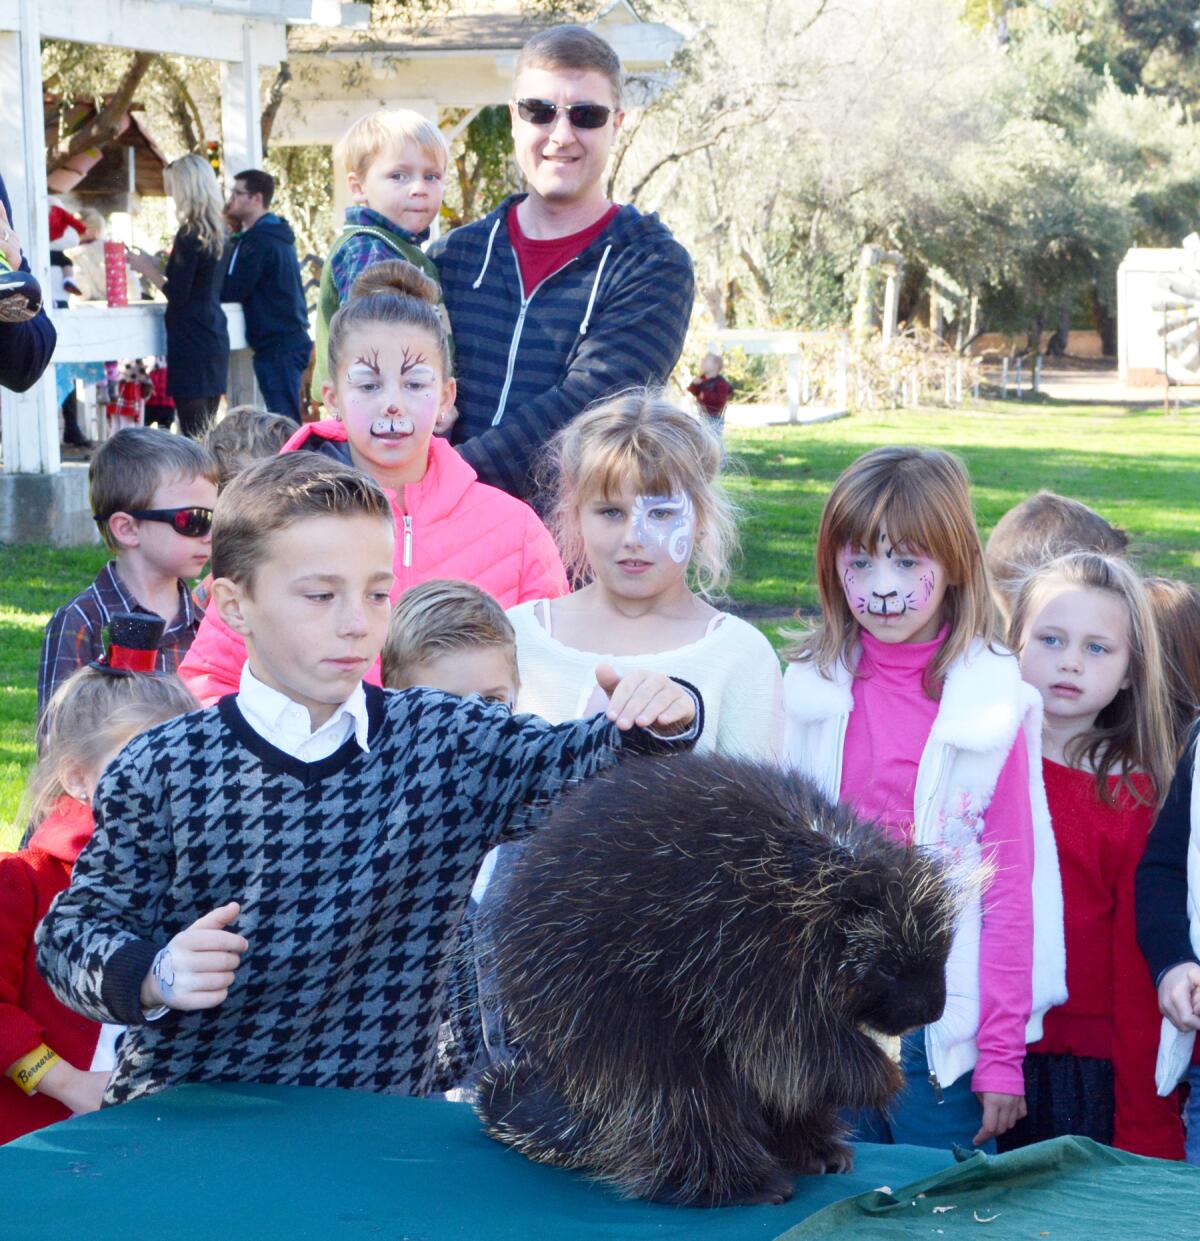 Children meeting an animal ambassador from Wild Wonders during a previous "Breakfast with Santa" at Bernardo Winery.